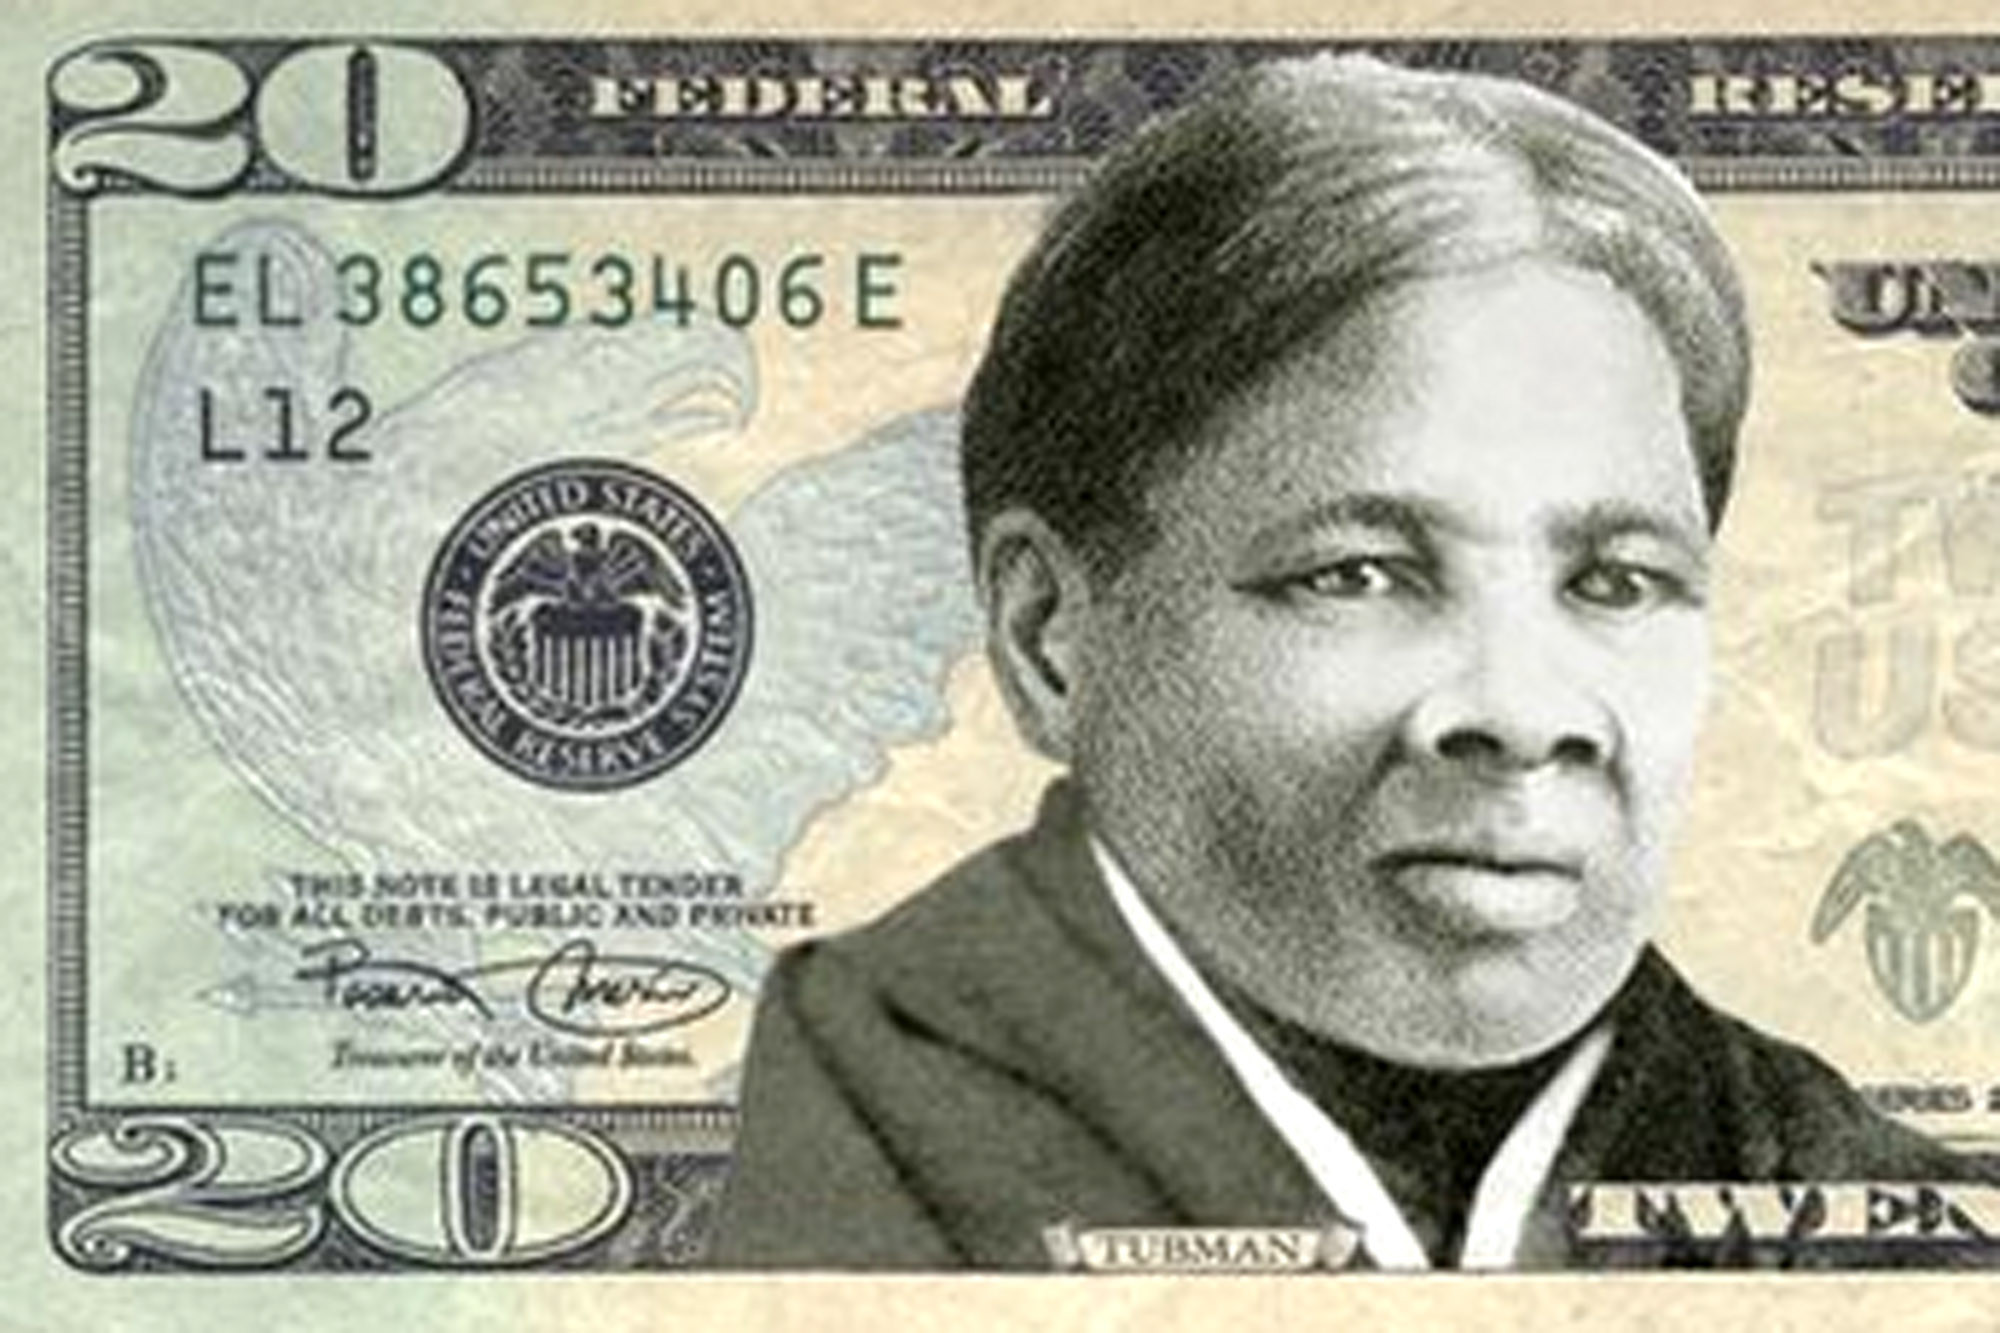 Harriet Tubman wins poll to replace Andrew Jackson on $20 bill